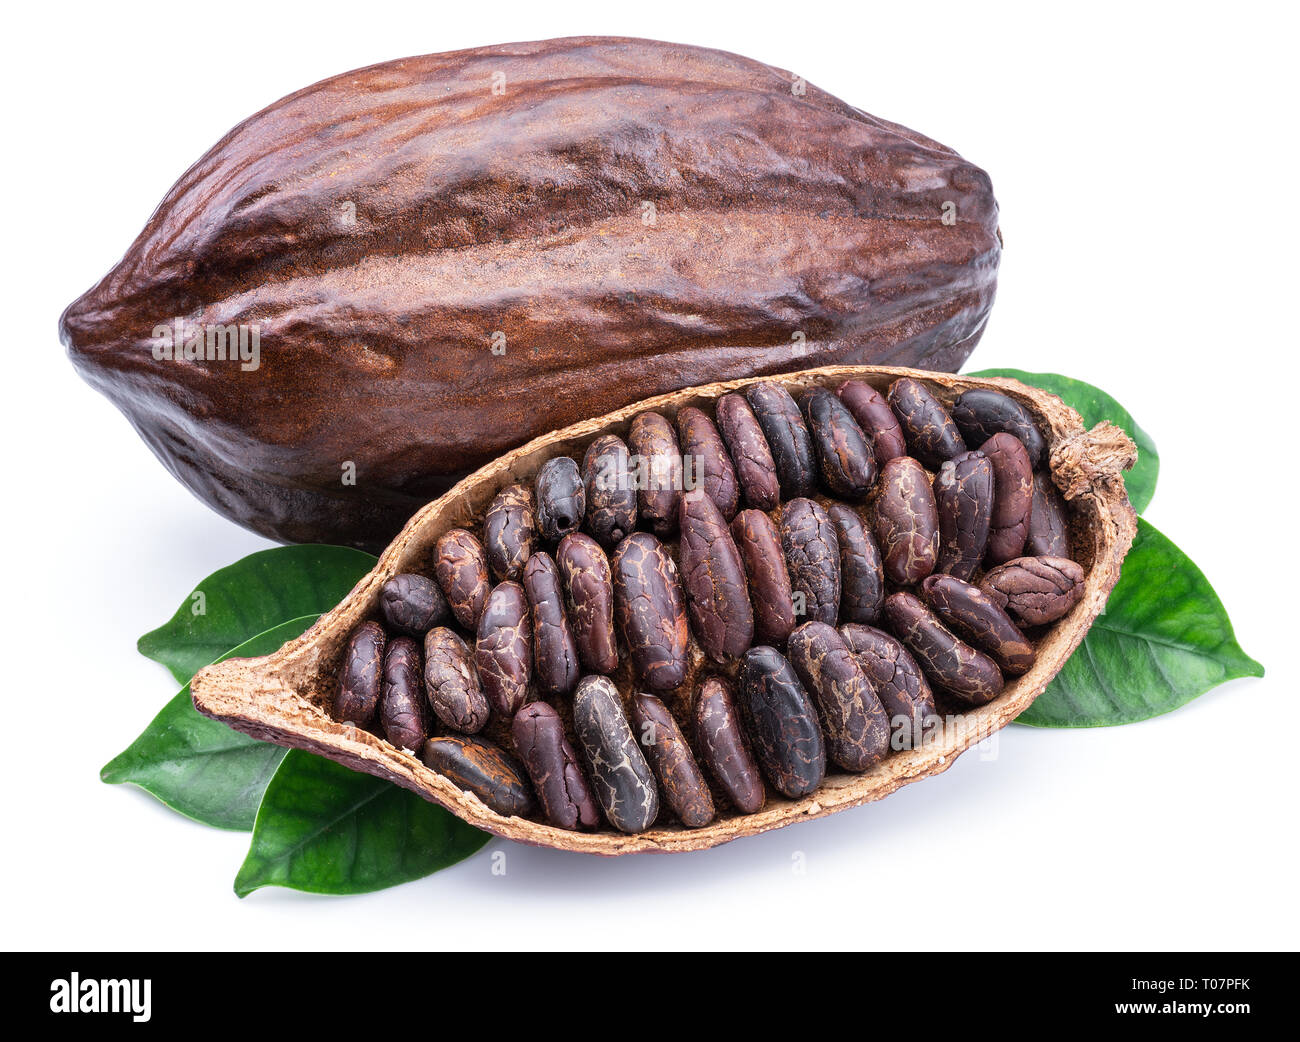 Cocoa pods and cocoa beans -chocolate basis isolated on a white background. Stock Photo